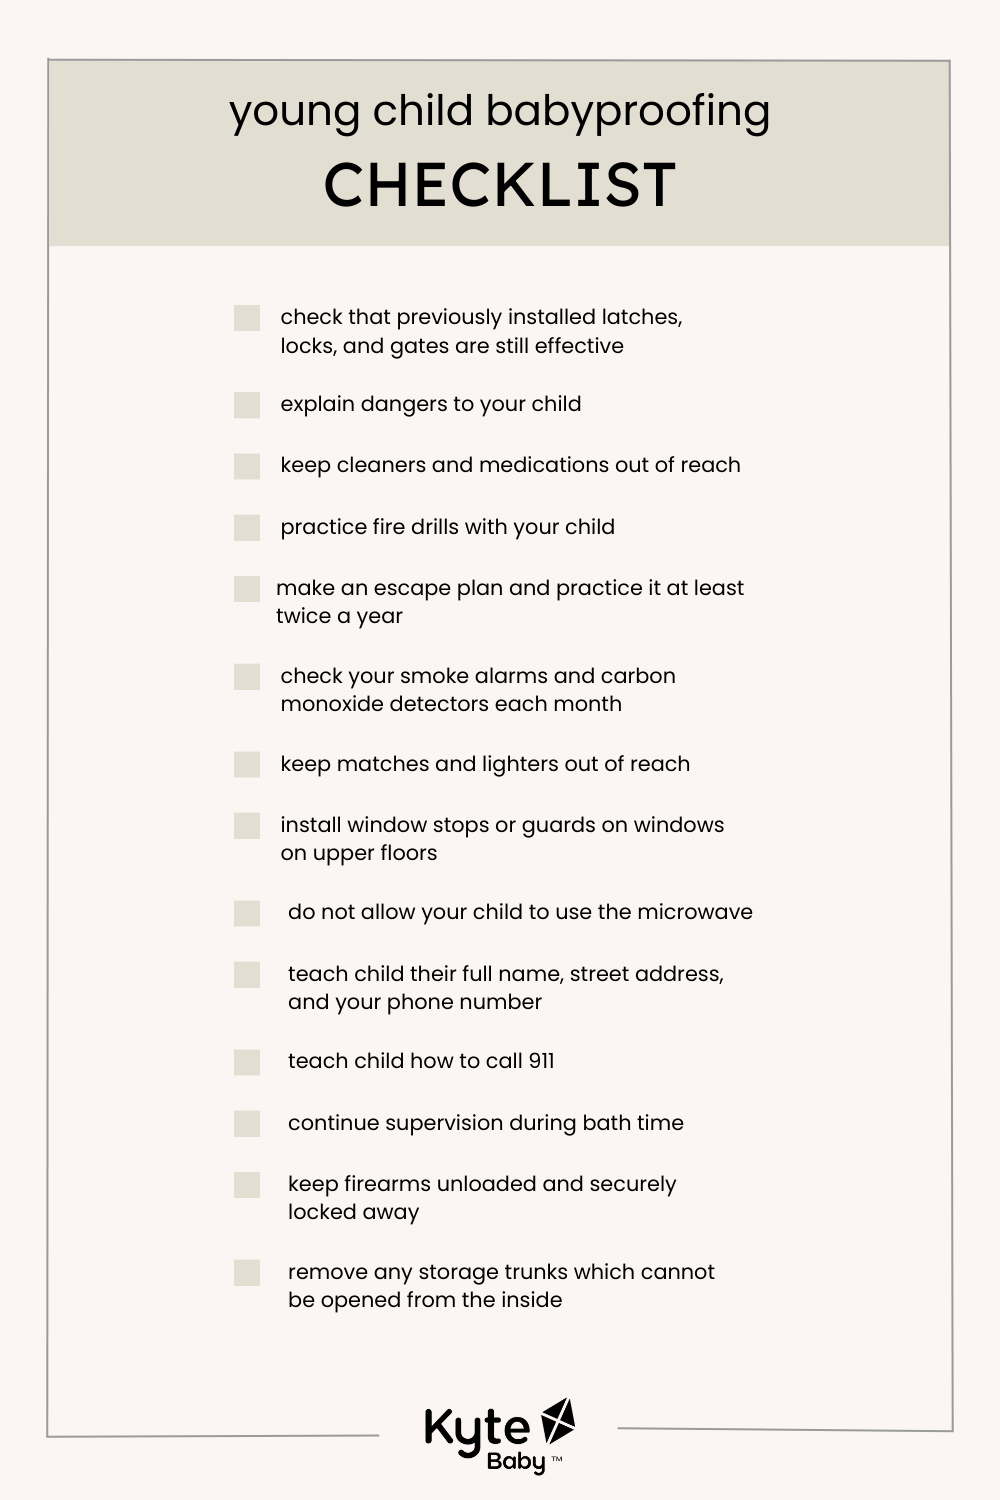 Kyte Baby Young Child Babyproofing Checklist